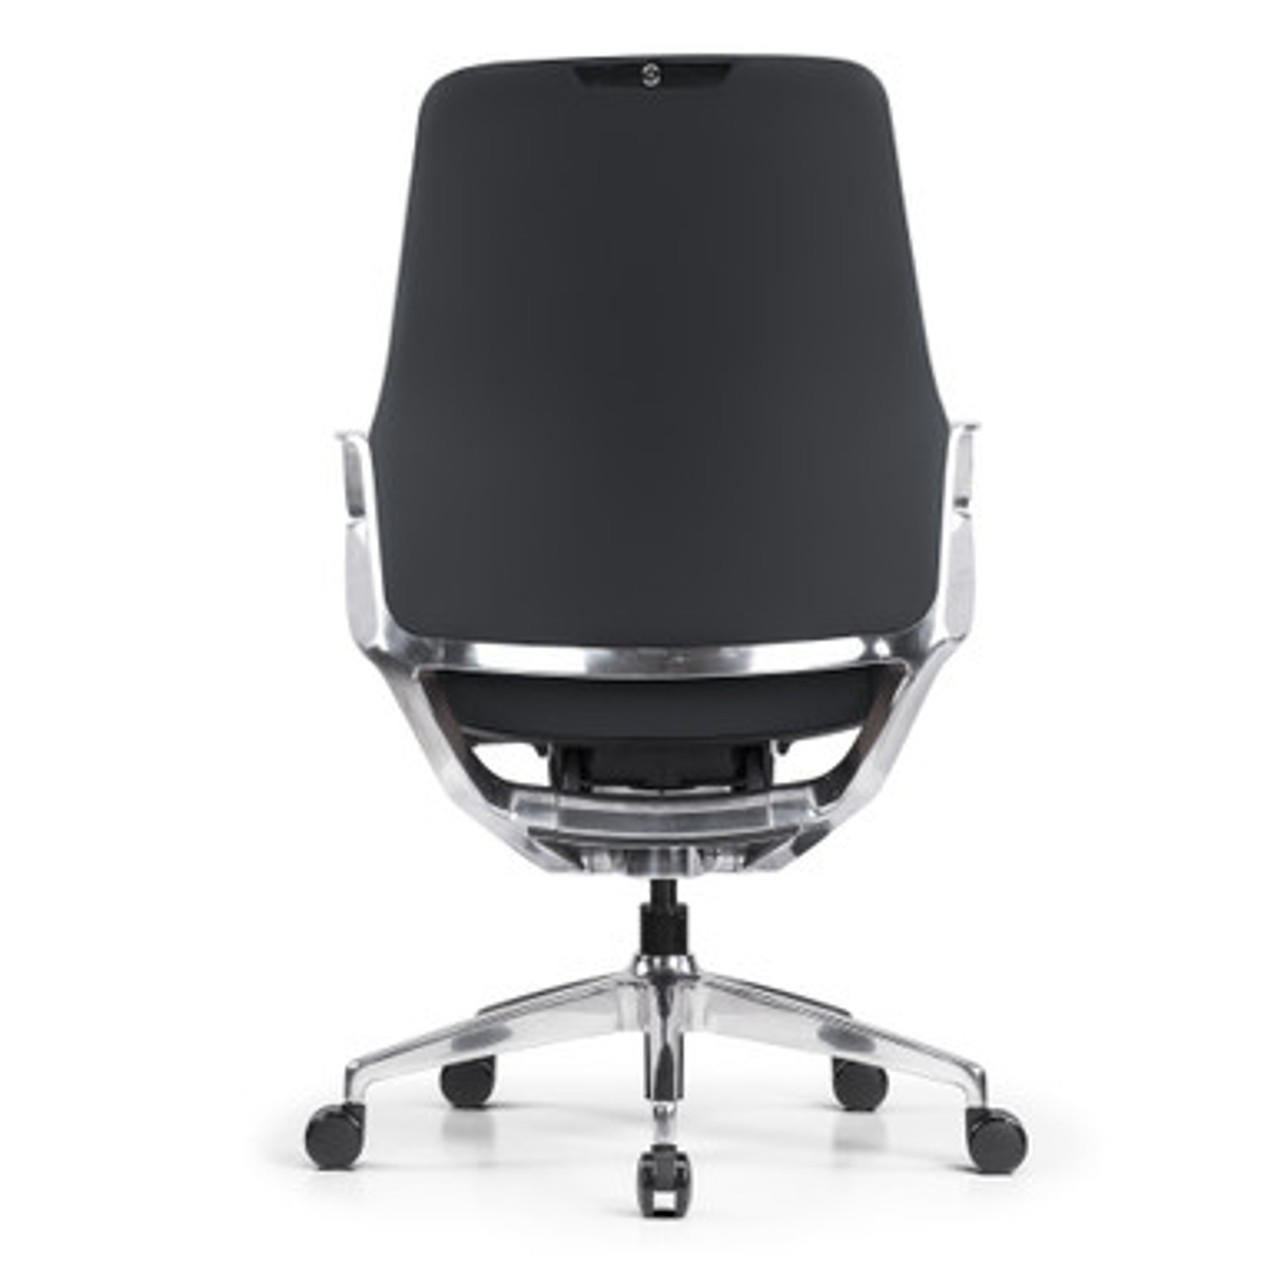  Office Source Veneto Executive Mid-Back Chair with Polished Aluminum Frame 301ML 